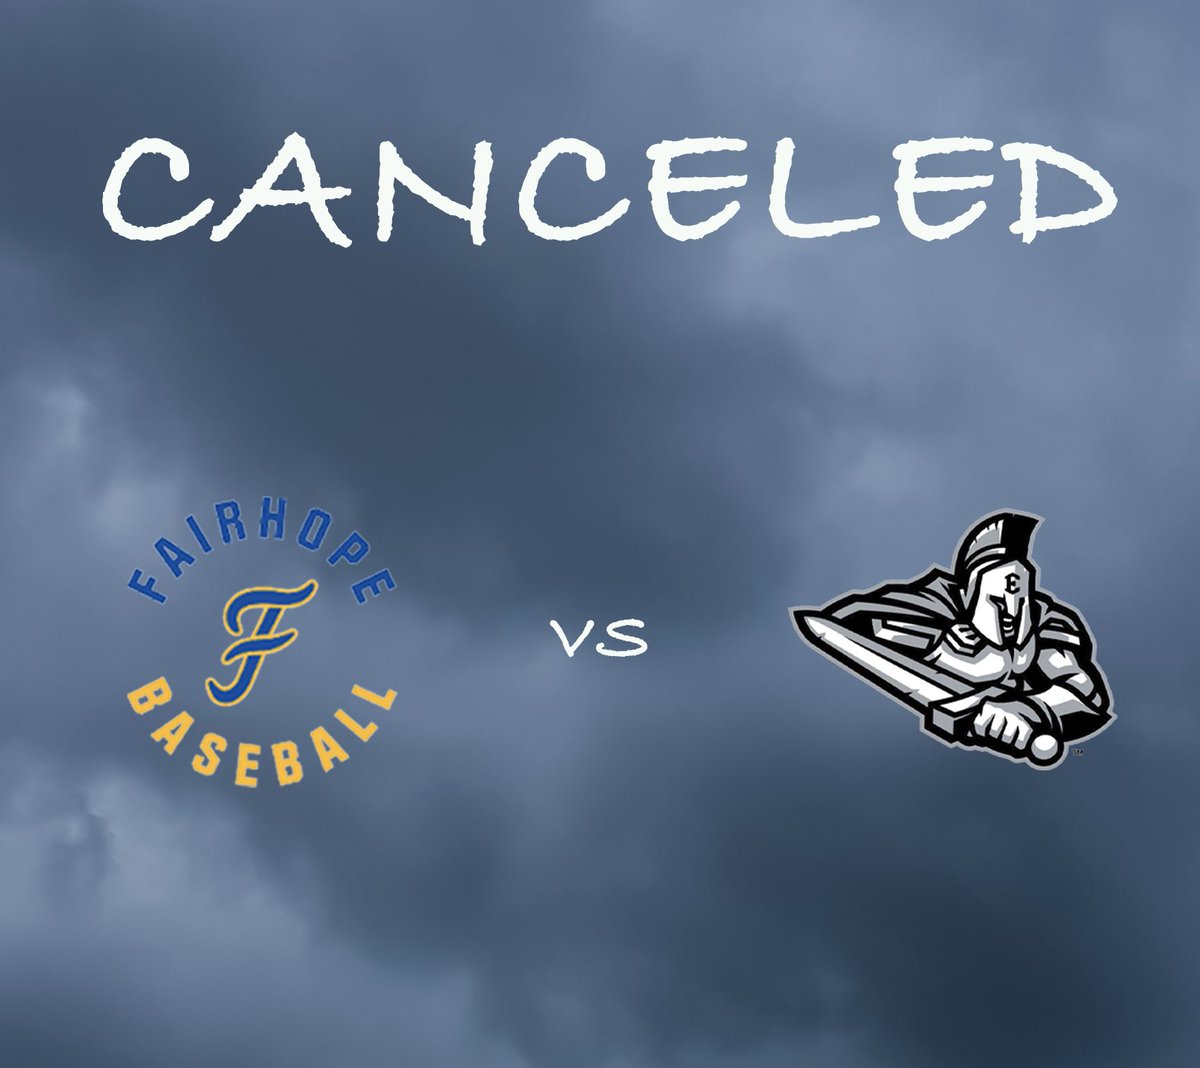 Today’s game at Elberta has been canceled. #GoPirates 🏴‍☠️